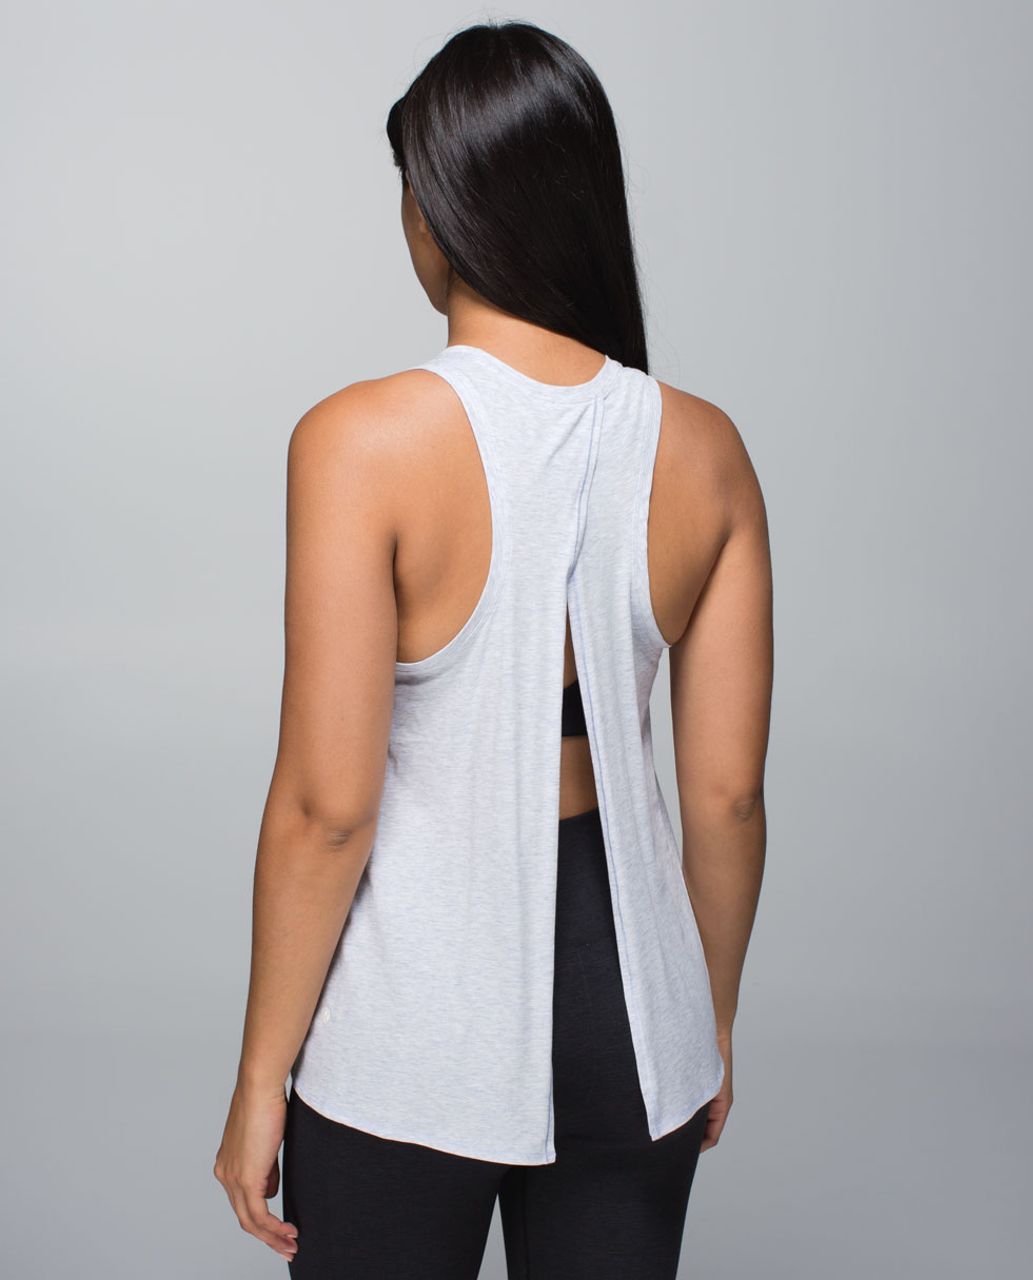 Lululemon All Tied Up Tank vs  Bestisun Tank: Which workout top is  best? - Reviewed